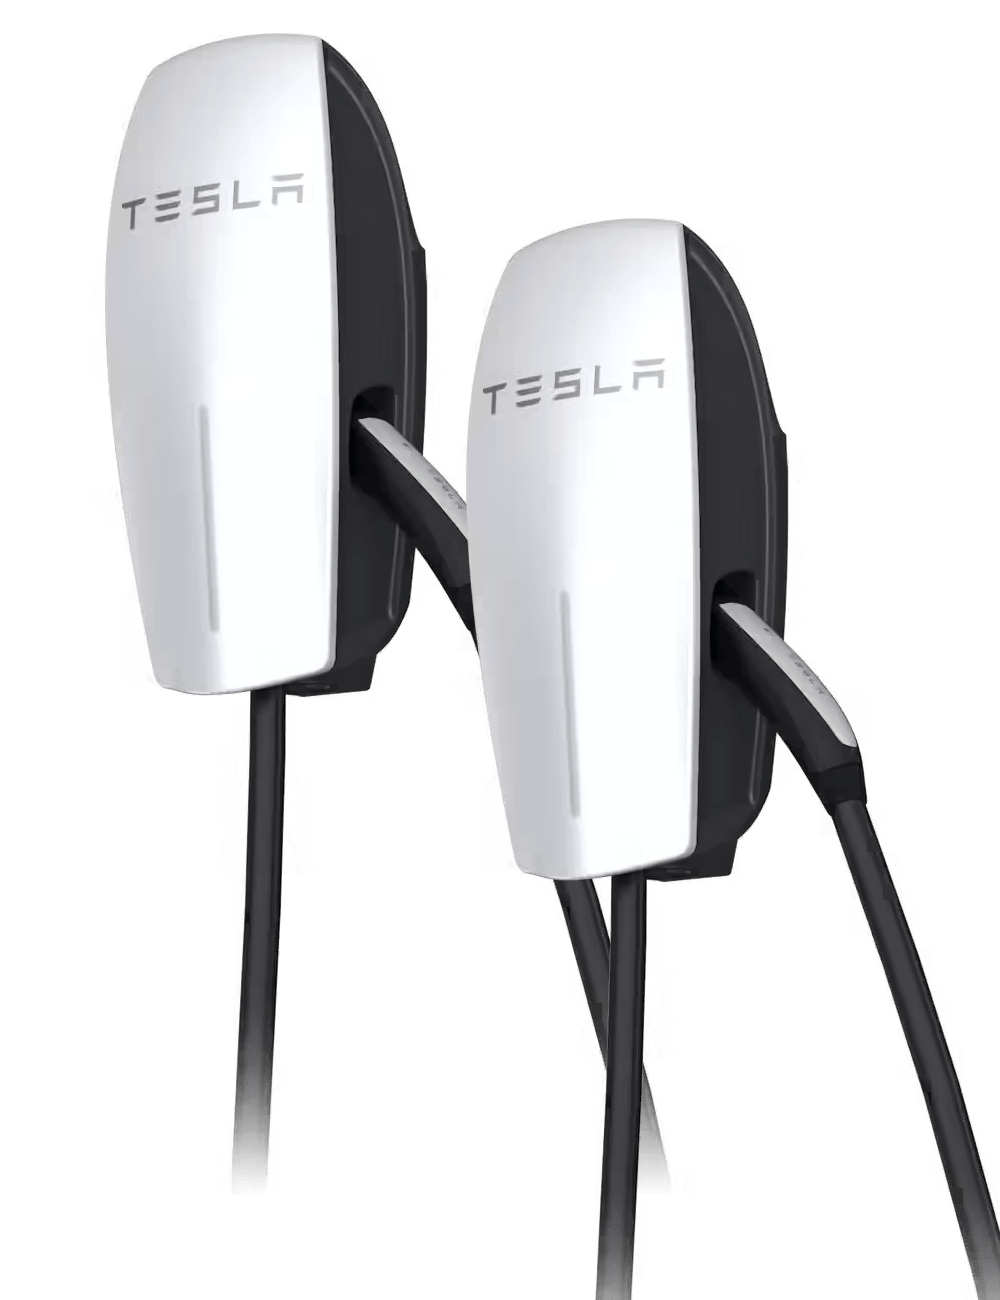 Greentech offers commercial tesla EV charger installation